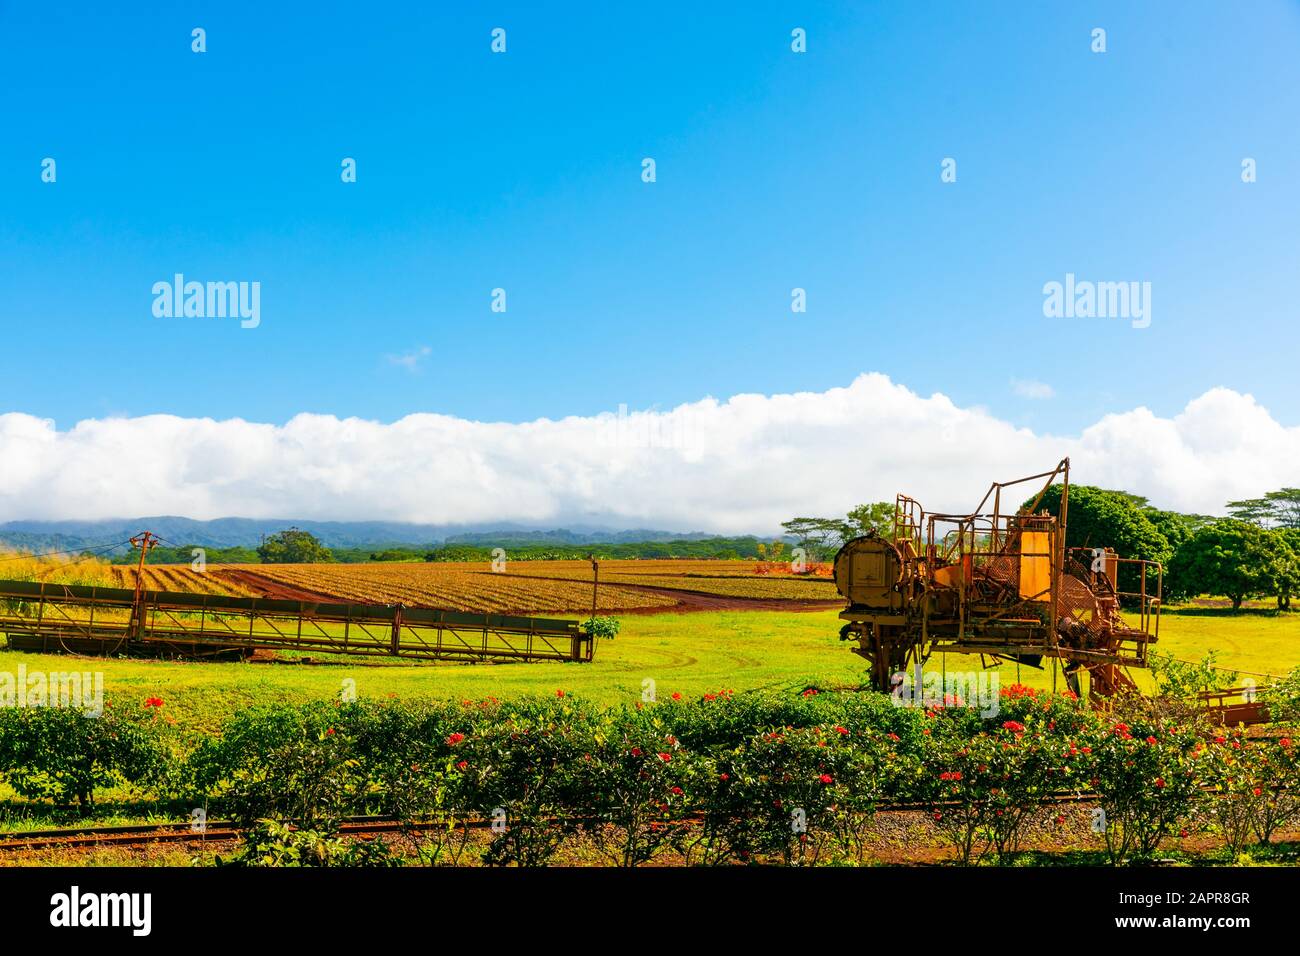 Plow on a tropical pineapple plantation Stock Photo